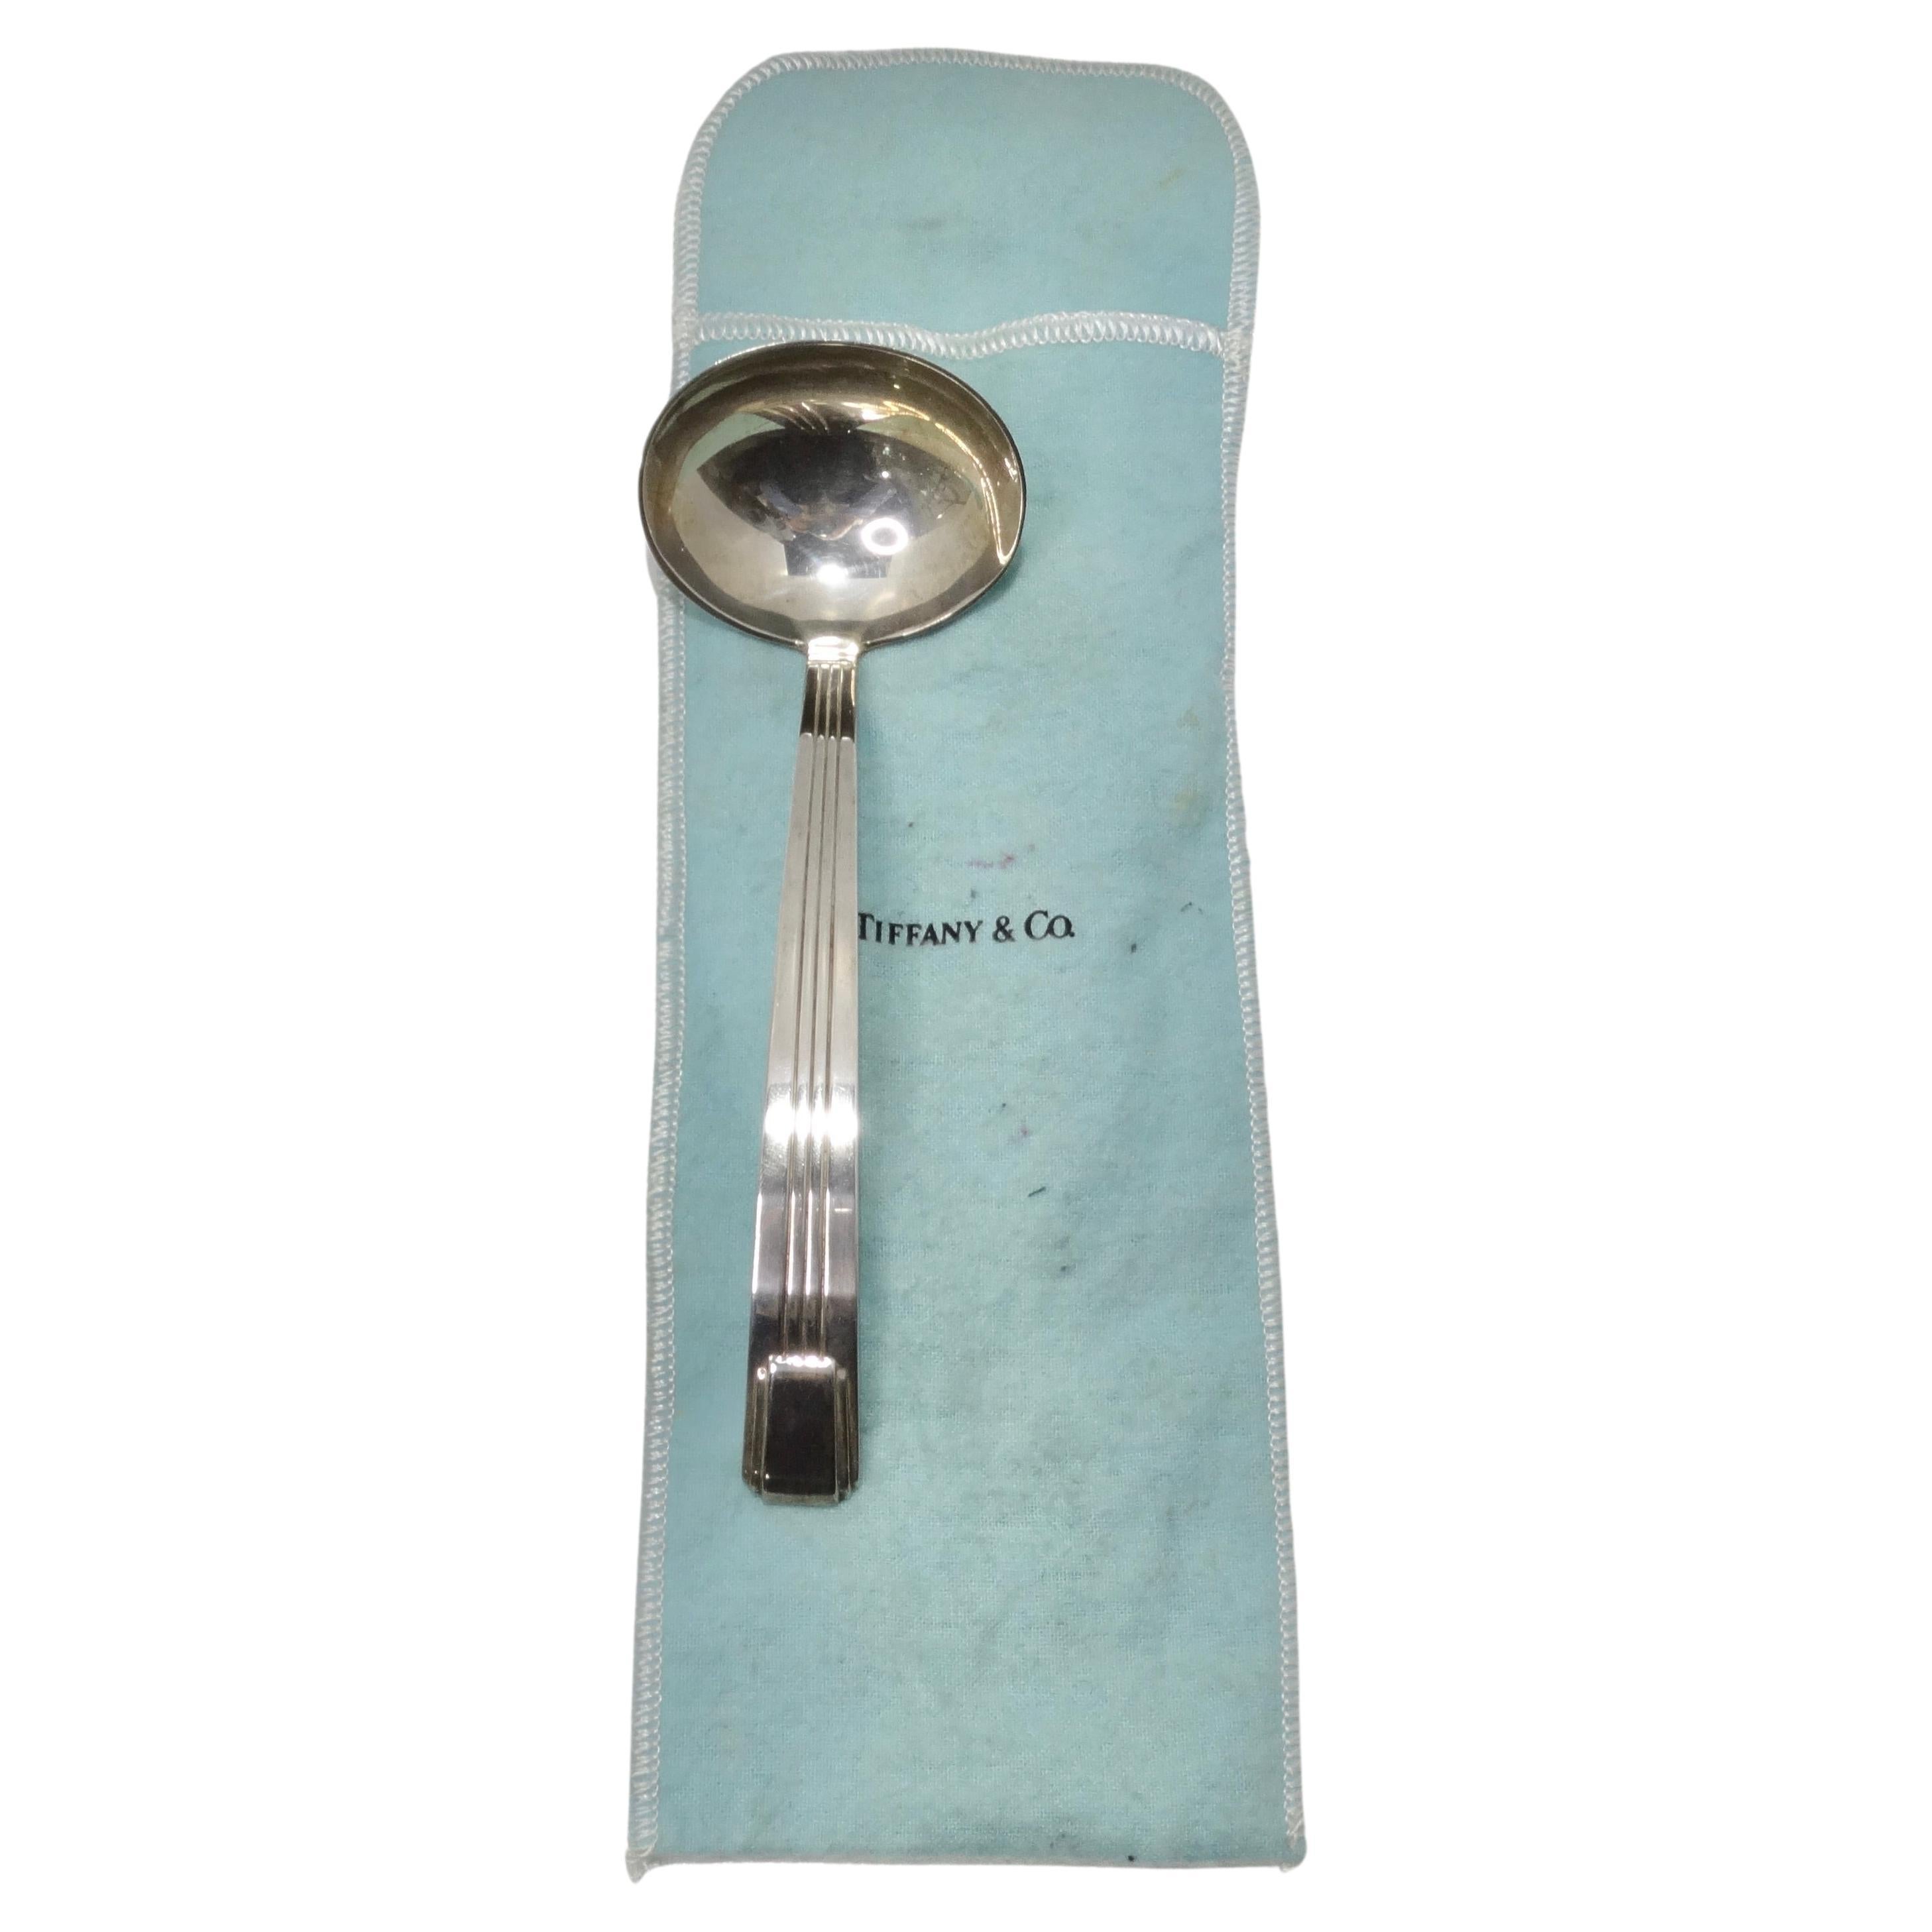 Tiffany & Co 1950s Silver Large Serving Spoon